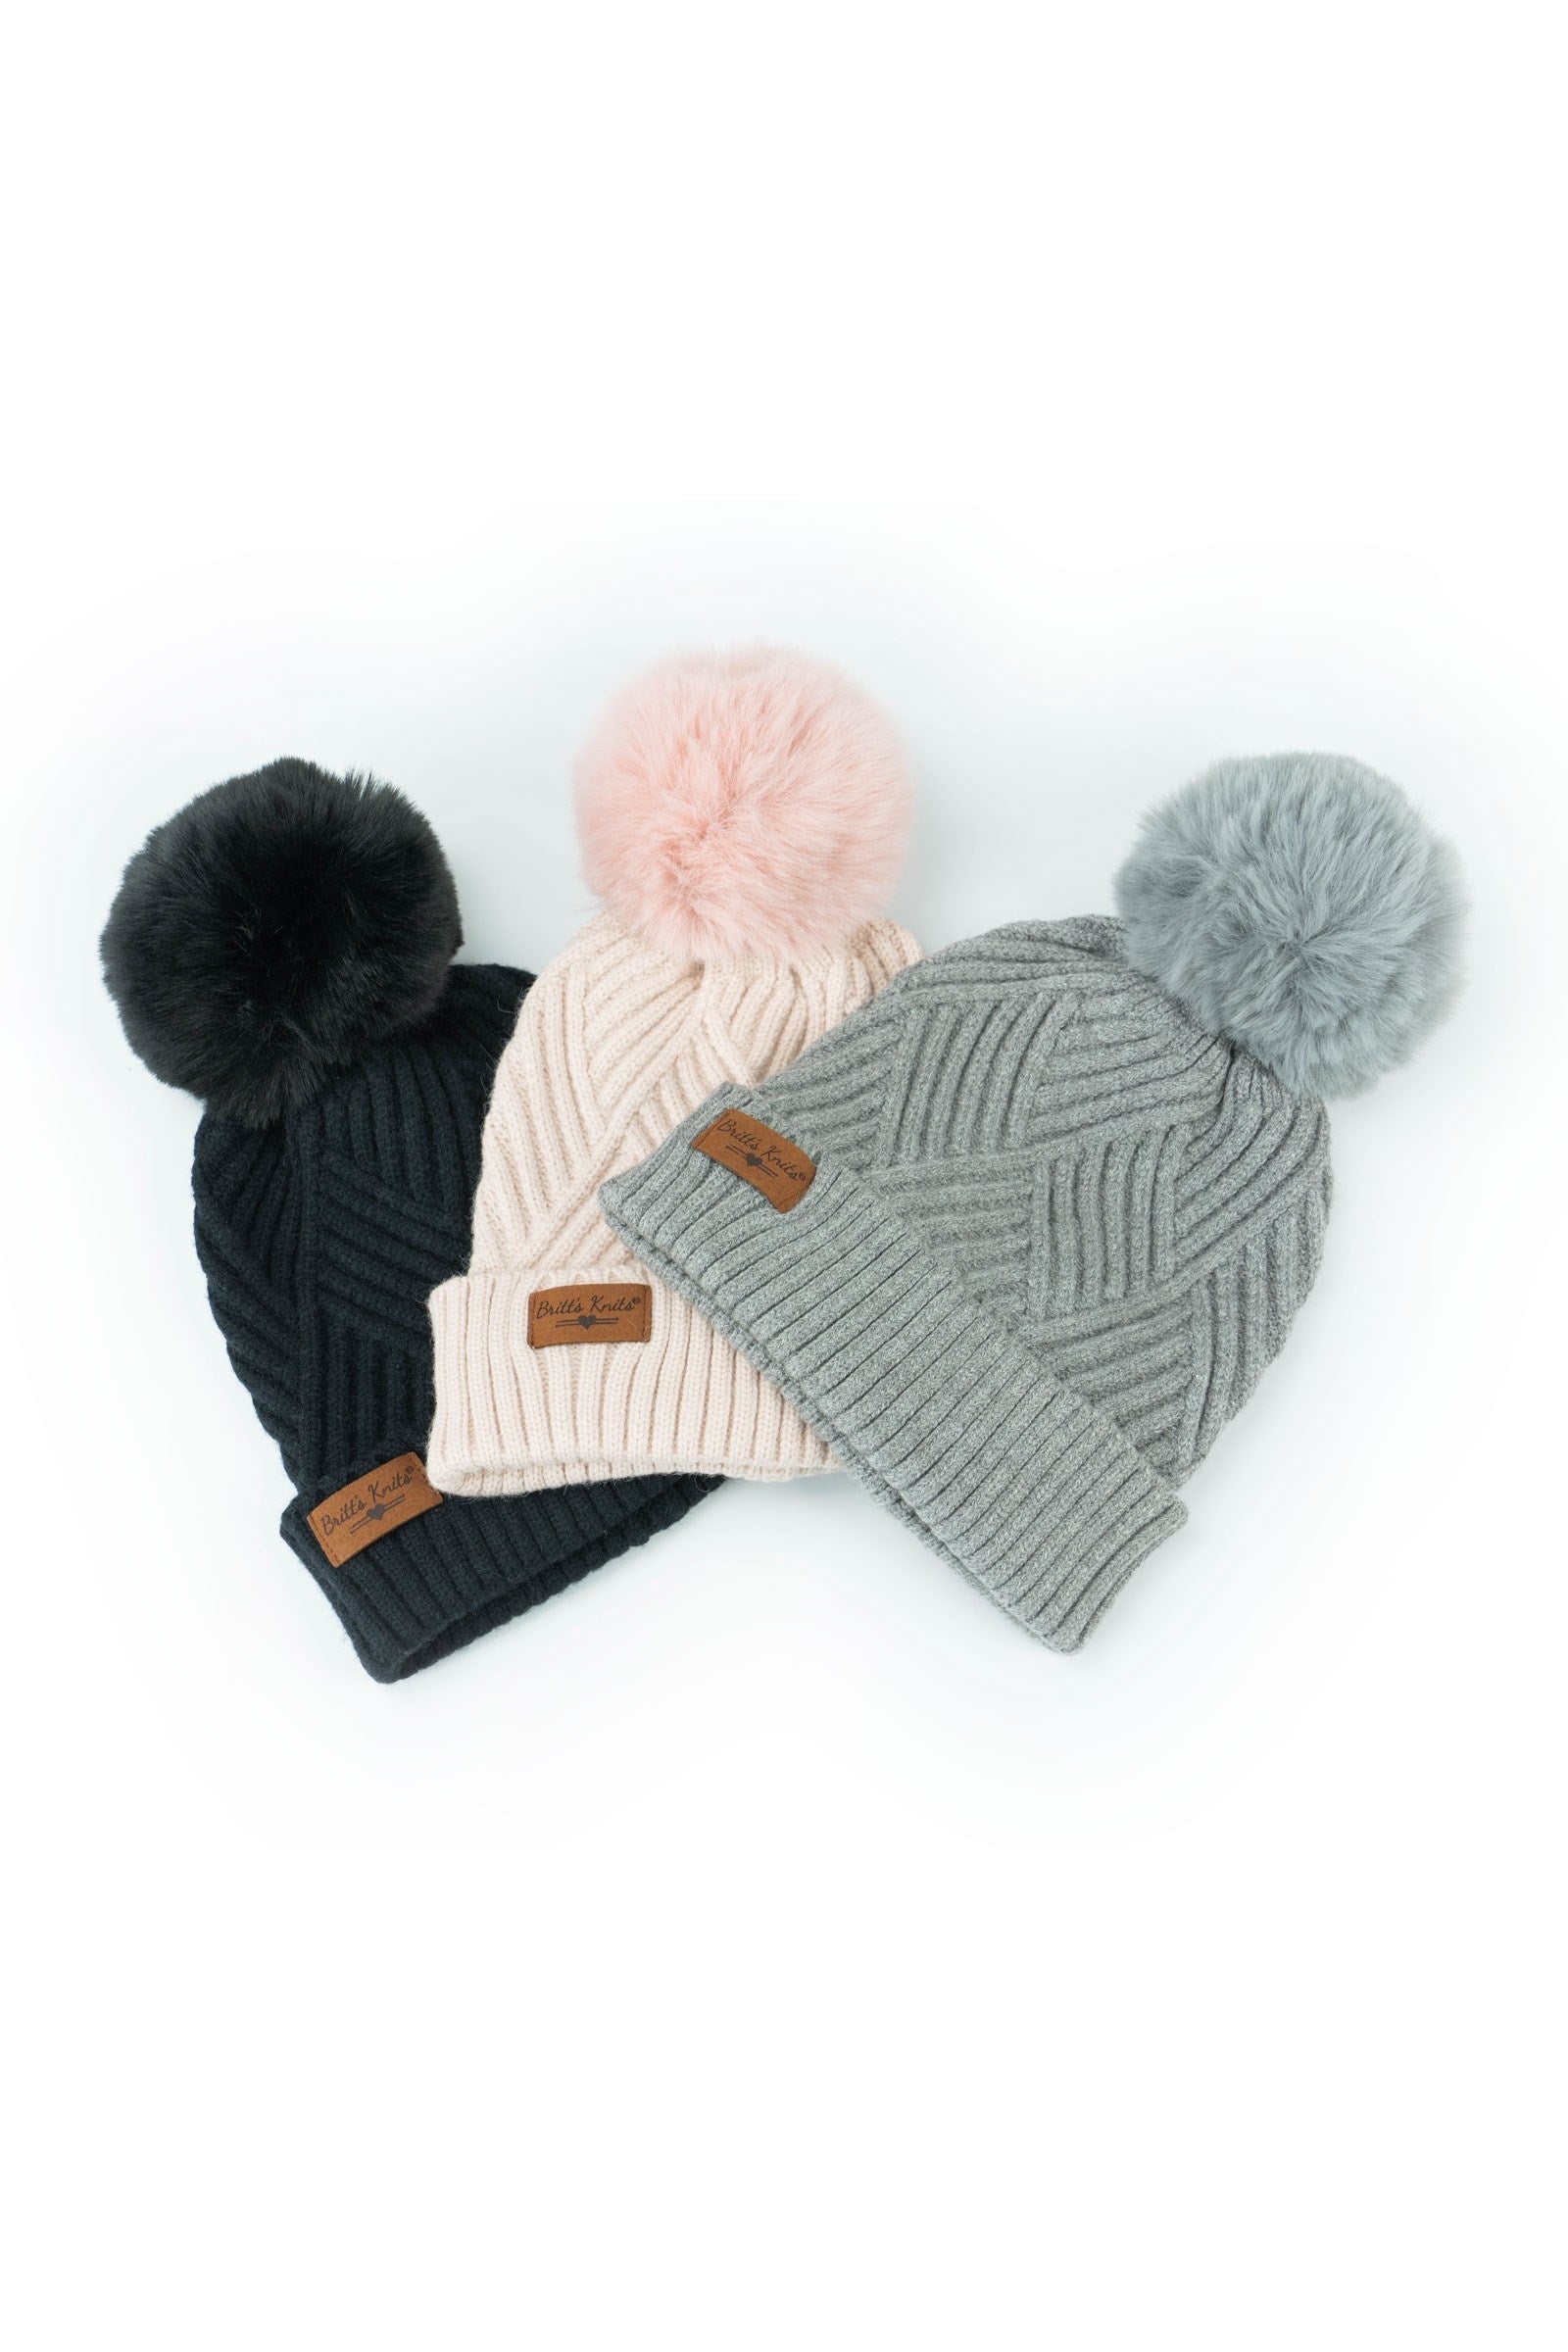 Shop Super Poof Pom Hat-Winter Hat at Ruby Joy Boutique, a Women's Clothing Store in Pickerington, Ohio